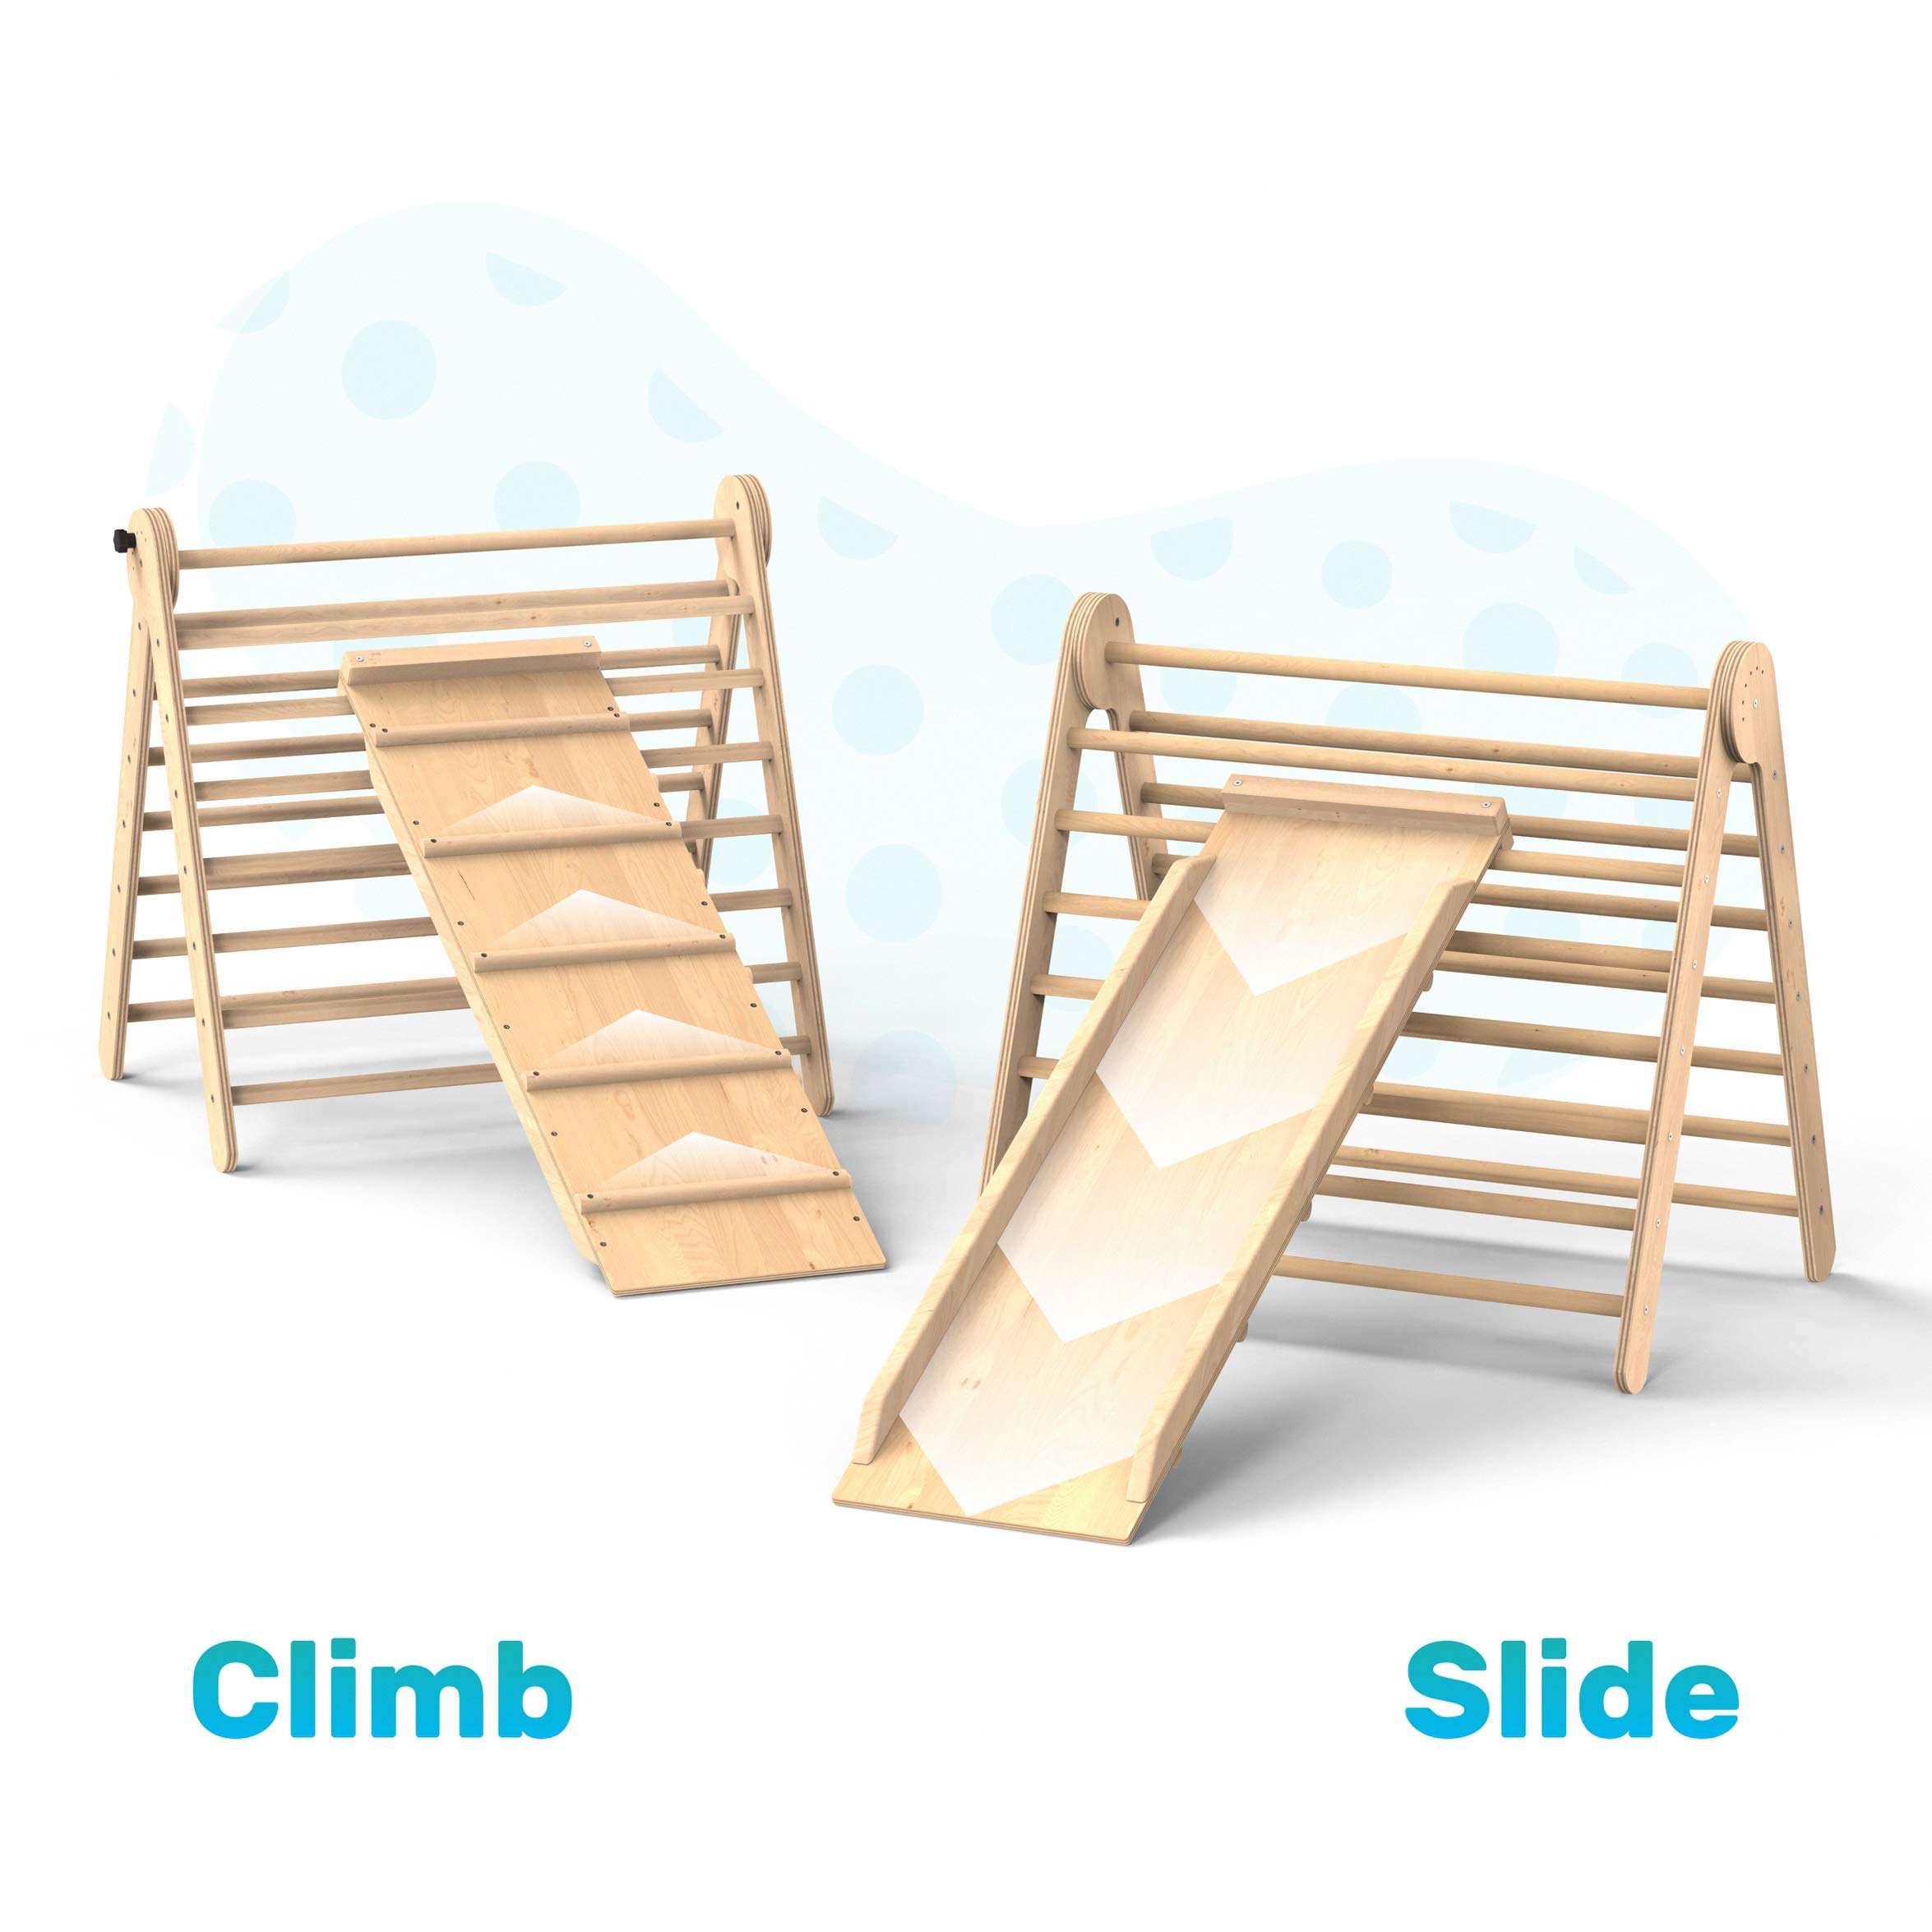 Foldable Climbing Toys for Toddlers 3 in 1 - Pikler Triangle Climber with Ramp Wooden Toddler Climbing Triangle Set 3 in 1 - Montessori Climbing Set for Sliding Pickler 3 Piece Climbing Gym for Kids